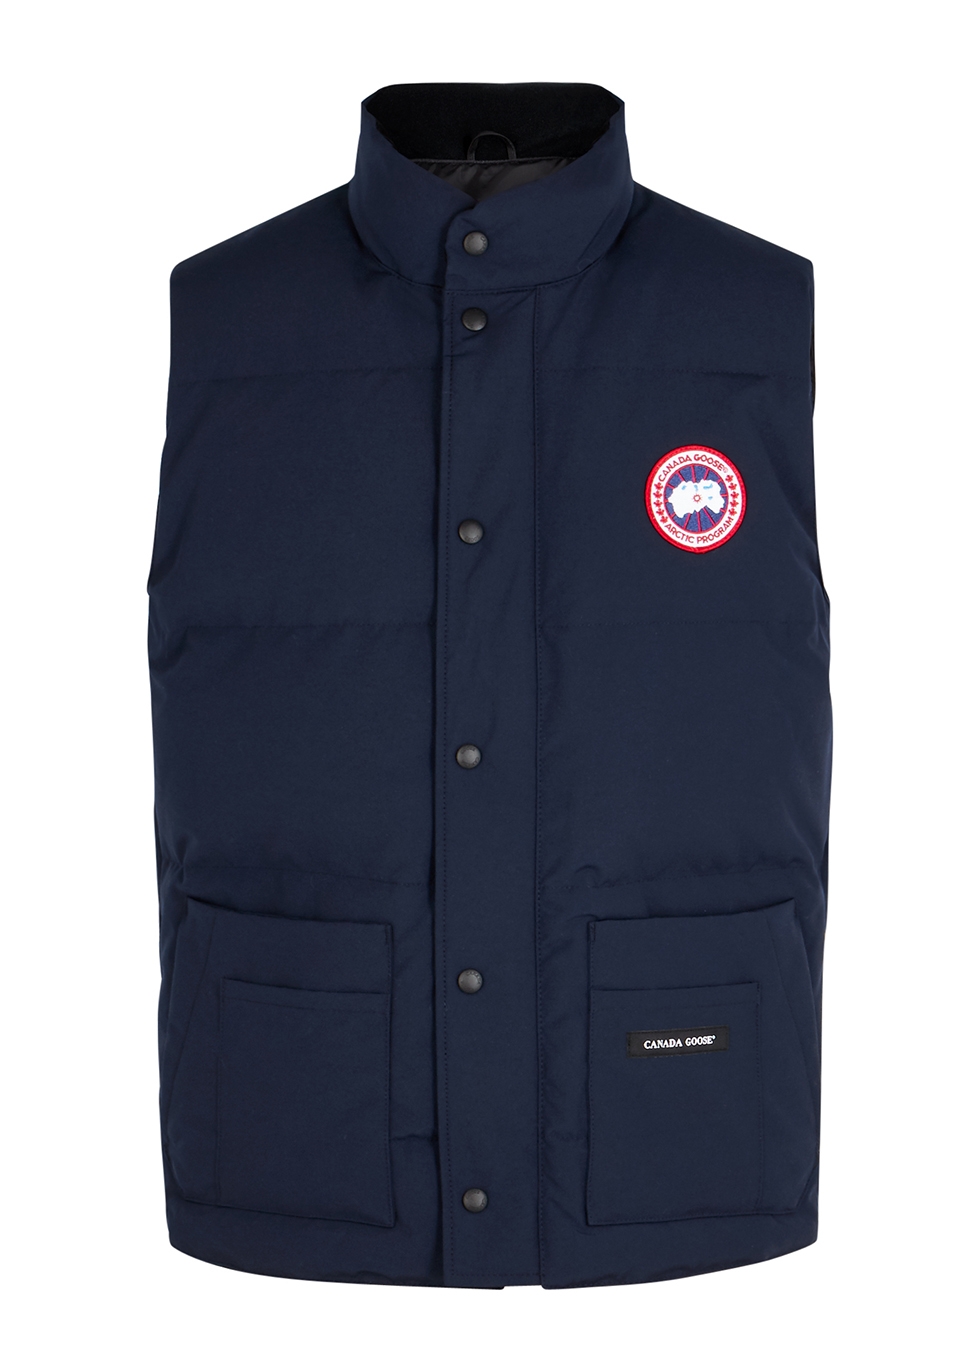 Canada Goose Freestyle navy quilted Artic-Tech shell gilet